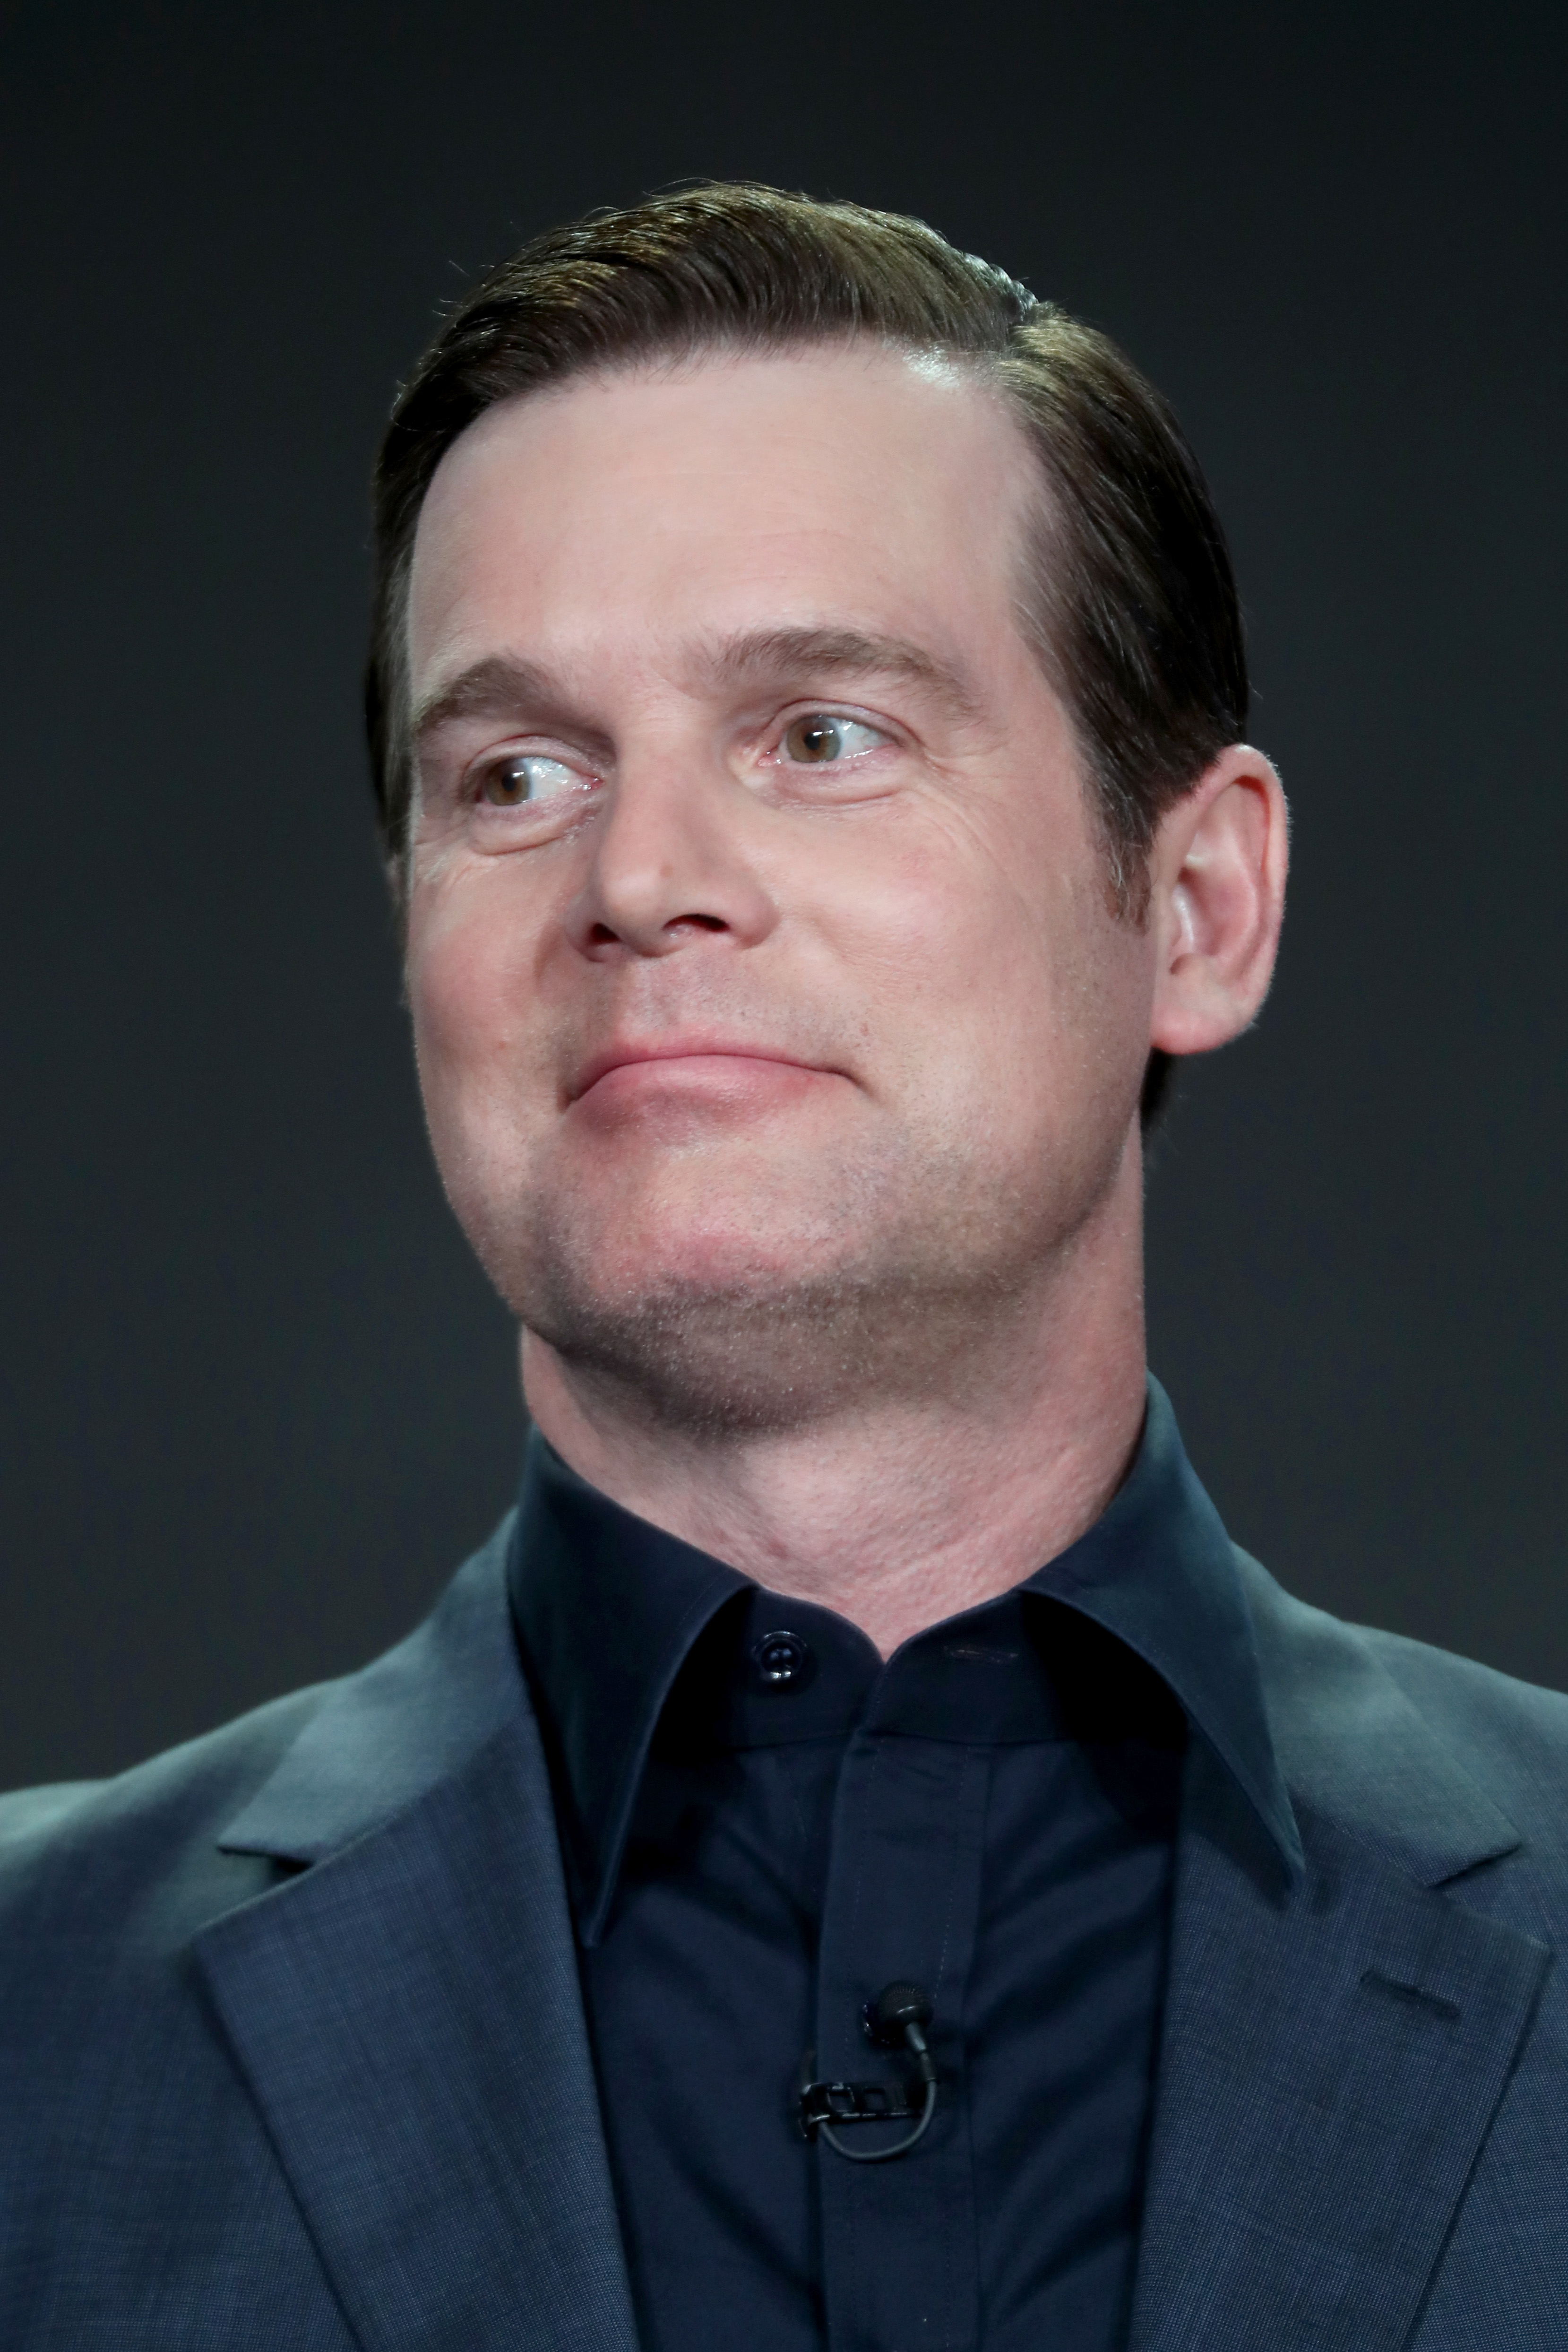 Peter Krause speaks onstage during the Disney-ABC portion of the 2017 Winter Television Critics Association Press Tour at Langham Hotel on January 10, 2017 in Pasadena, California. | Source: Getty Images